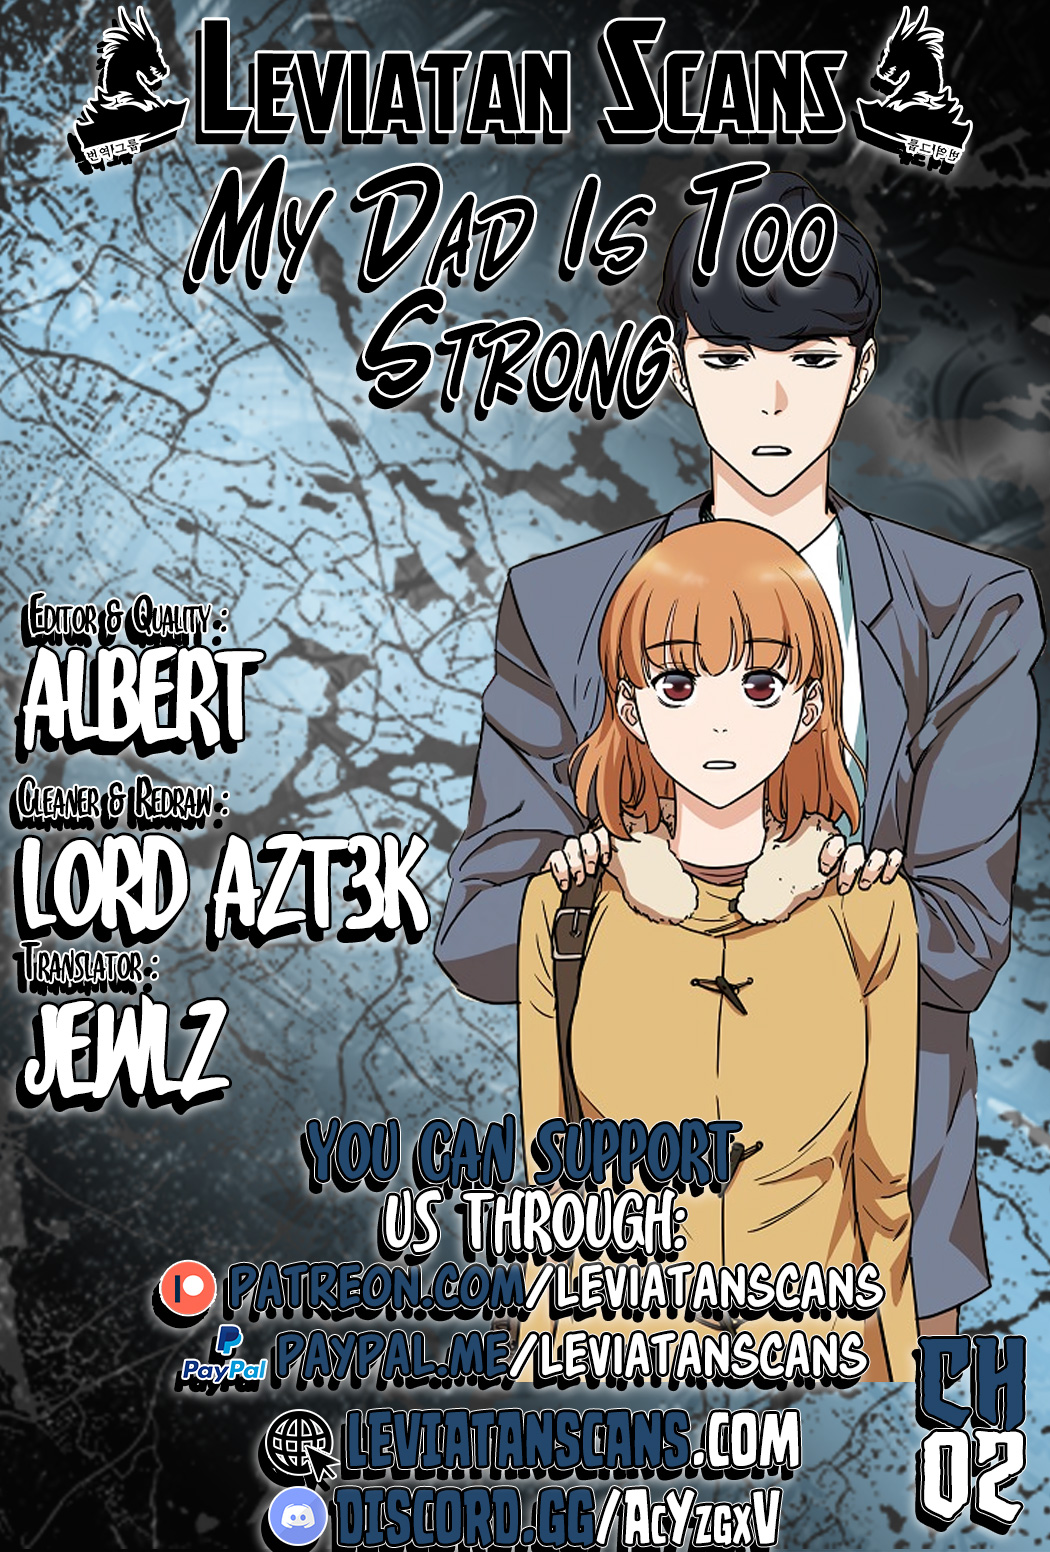 My Dad is Too Strong - Chapter 2581 - Image 1